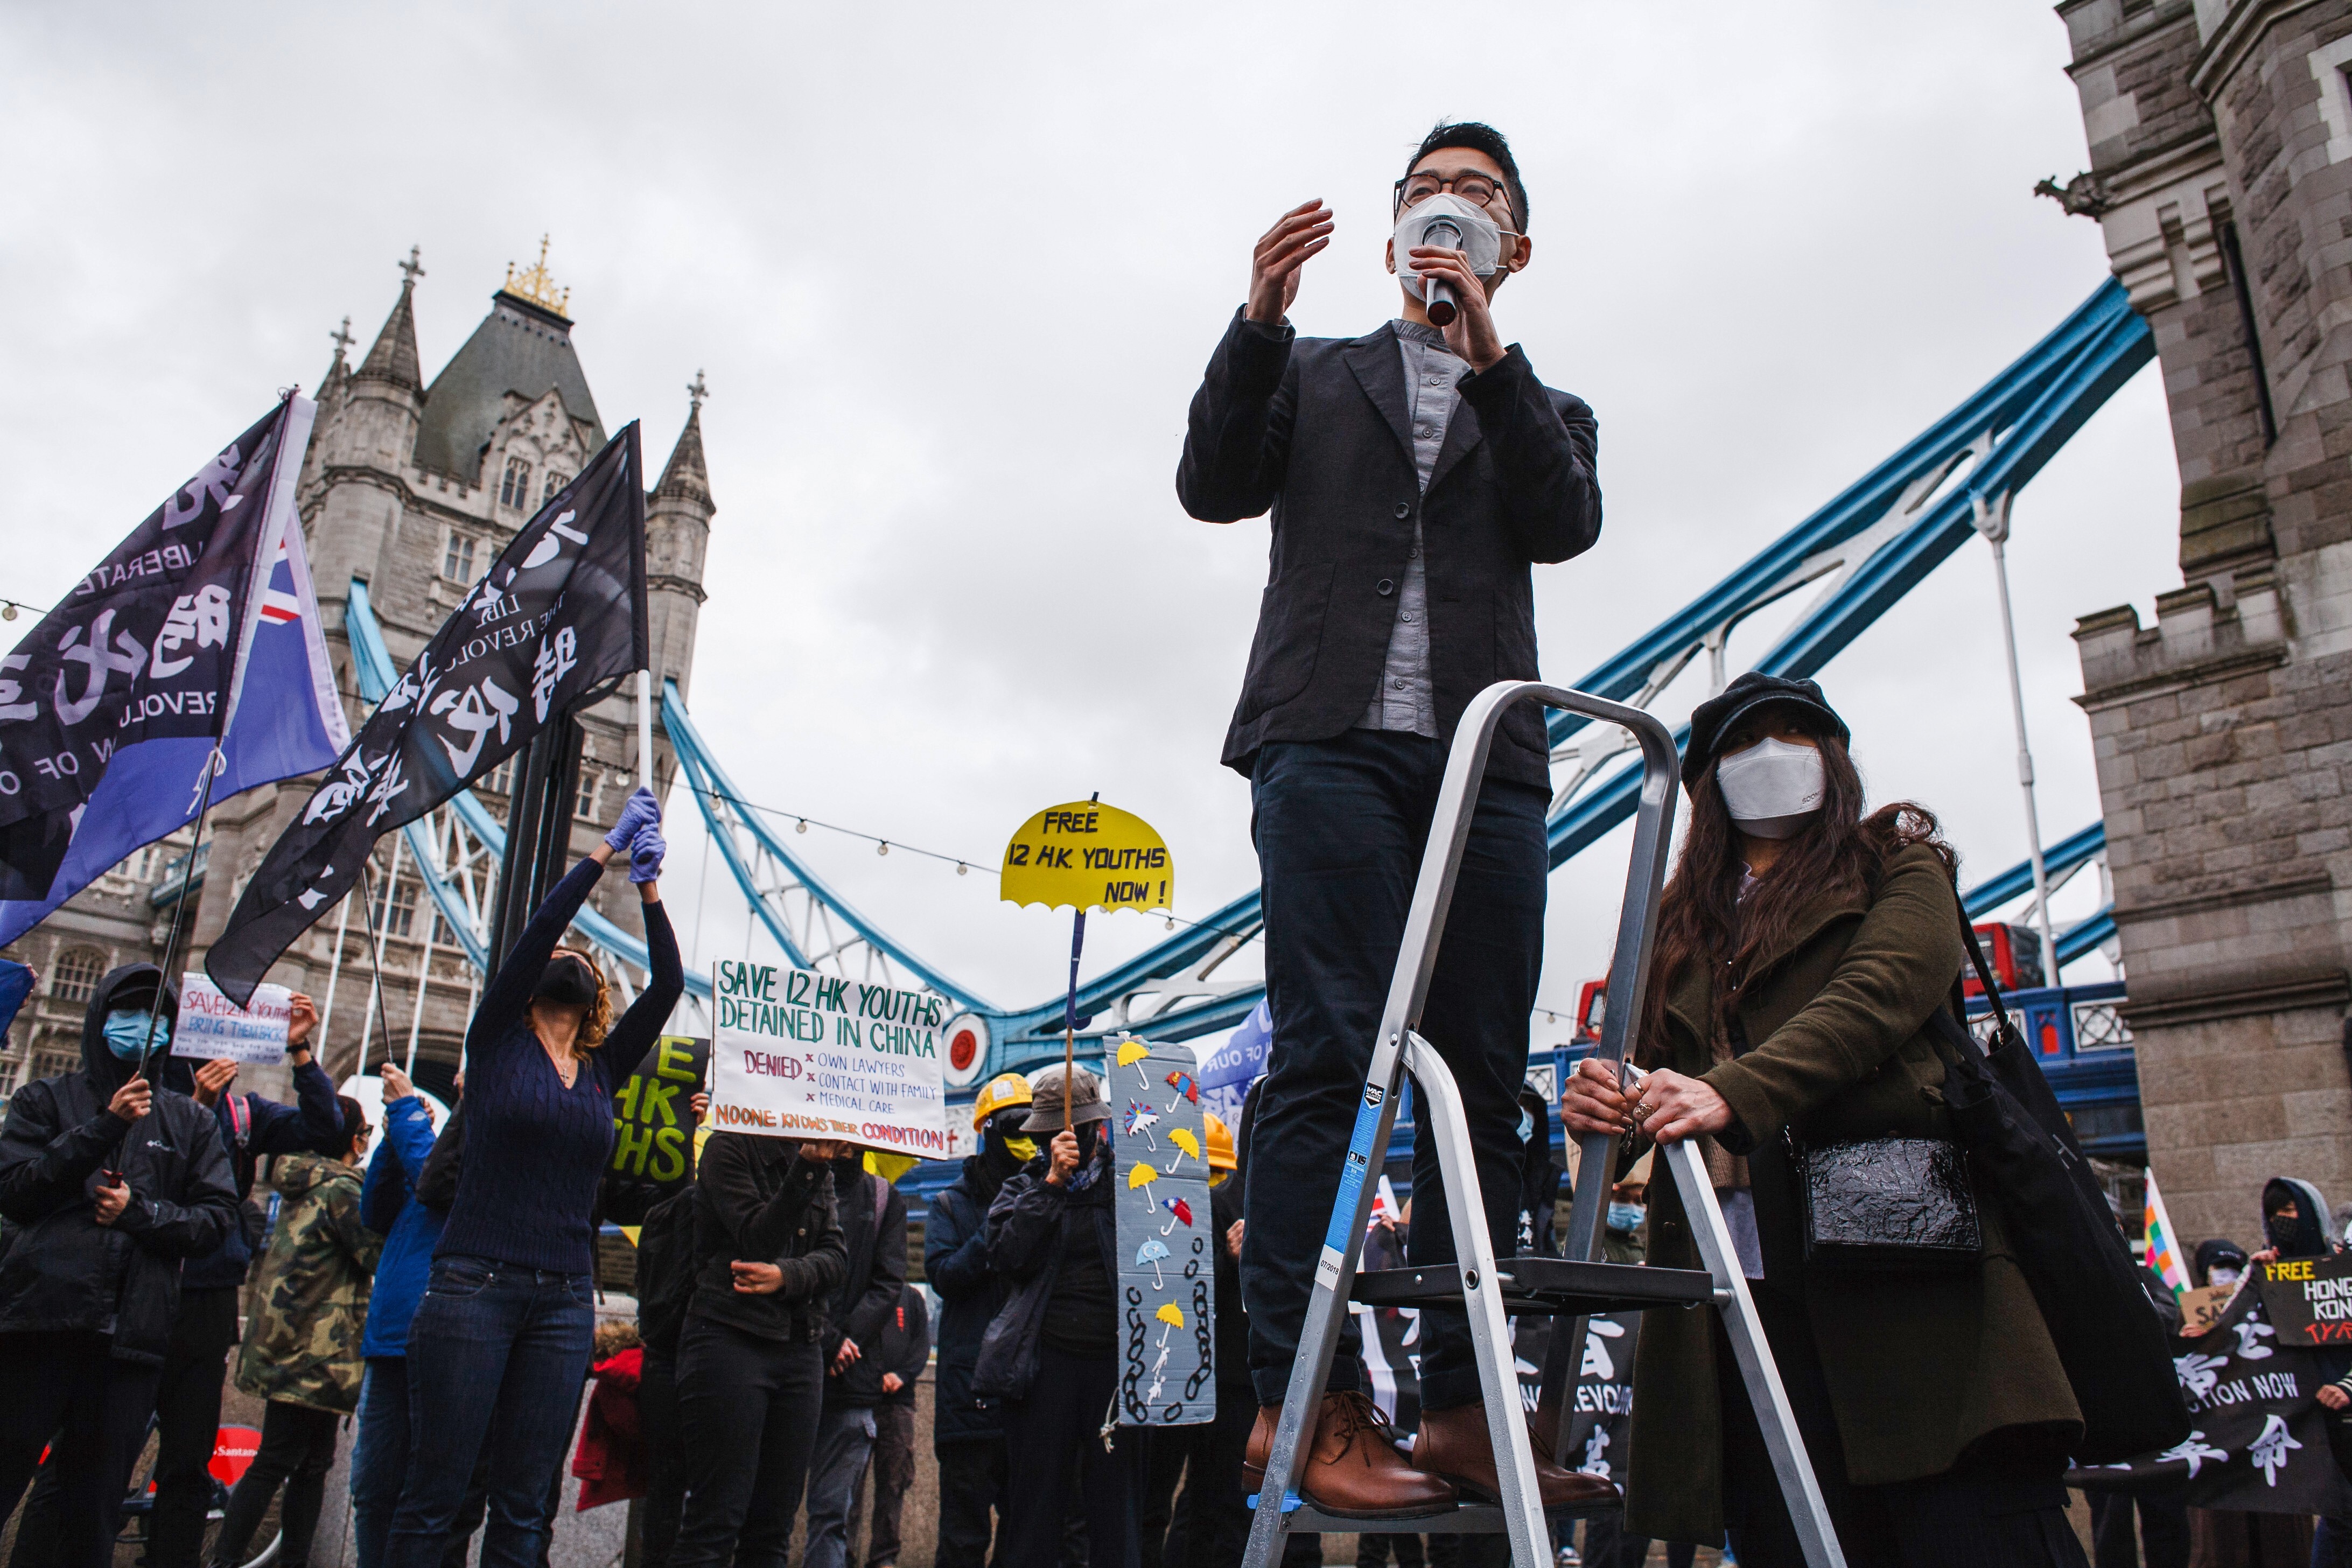 Exiled activist Nathan Law addresses a recent rally in London. Photo: NurPhoto via Getty Images